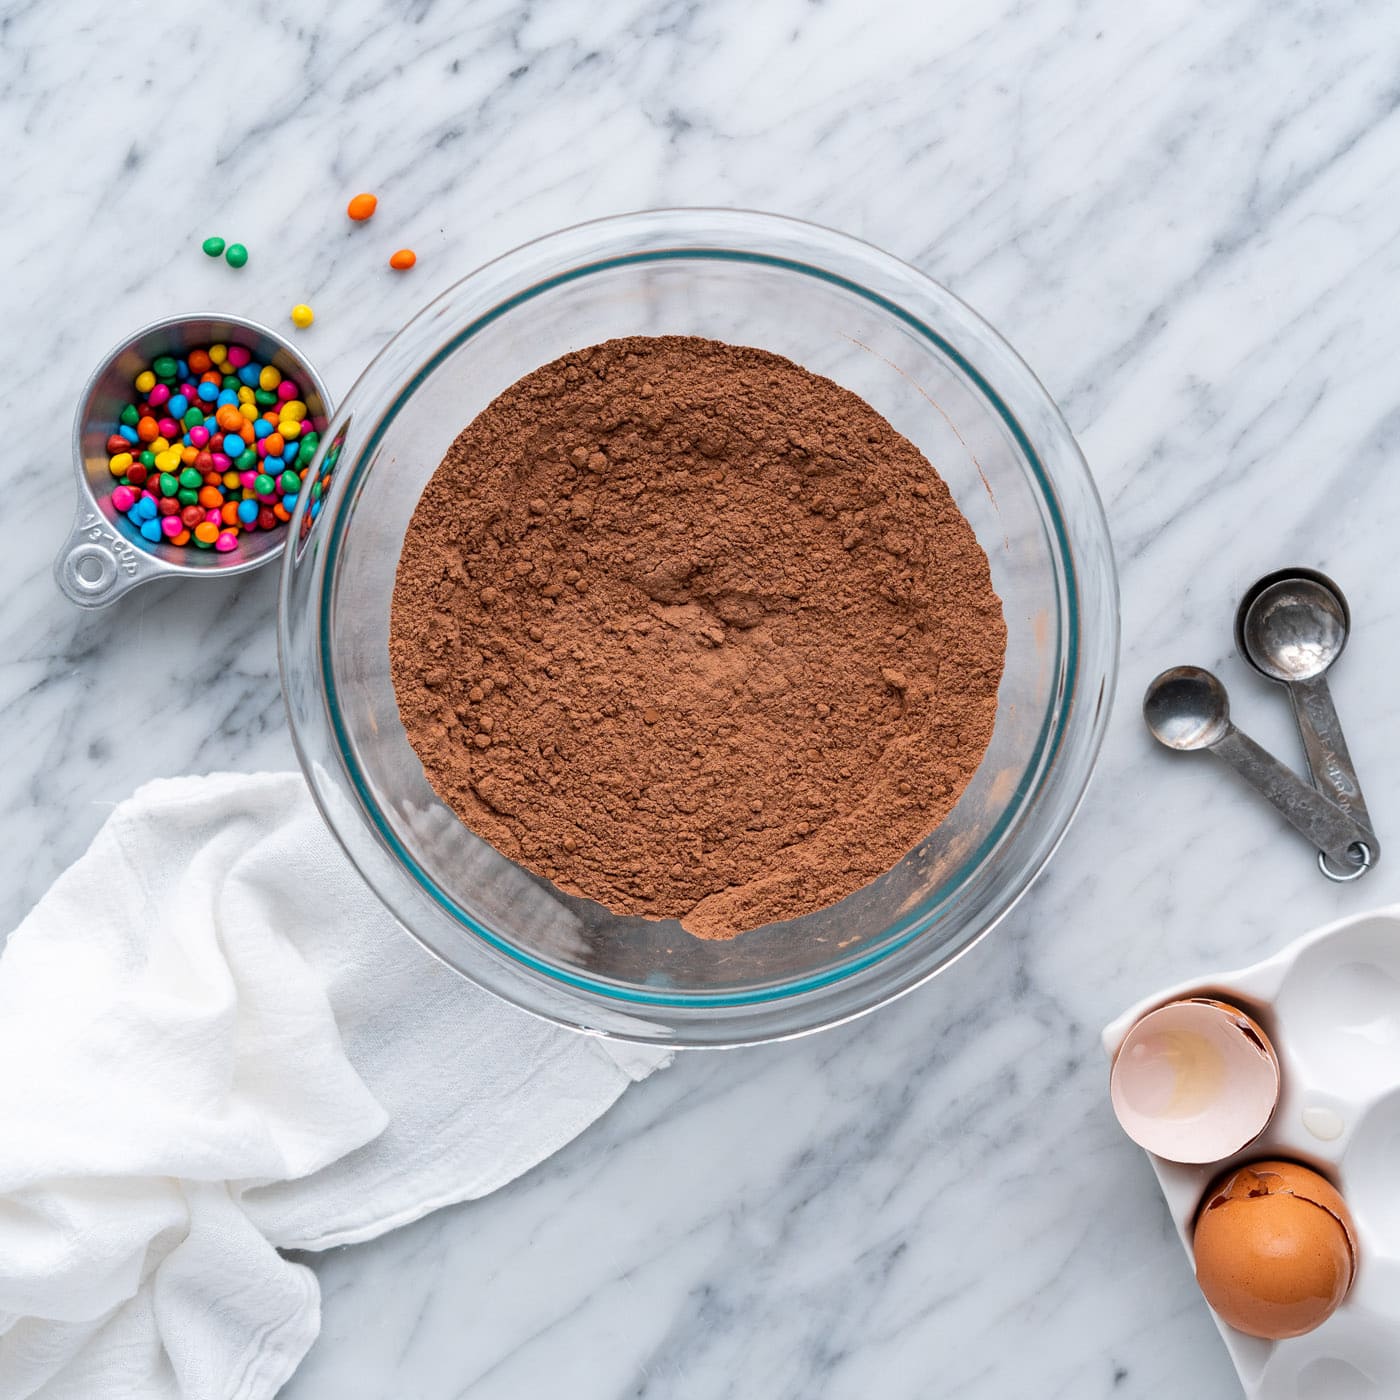 flour and cocoa powder mixture in a bowl